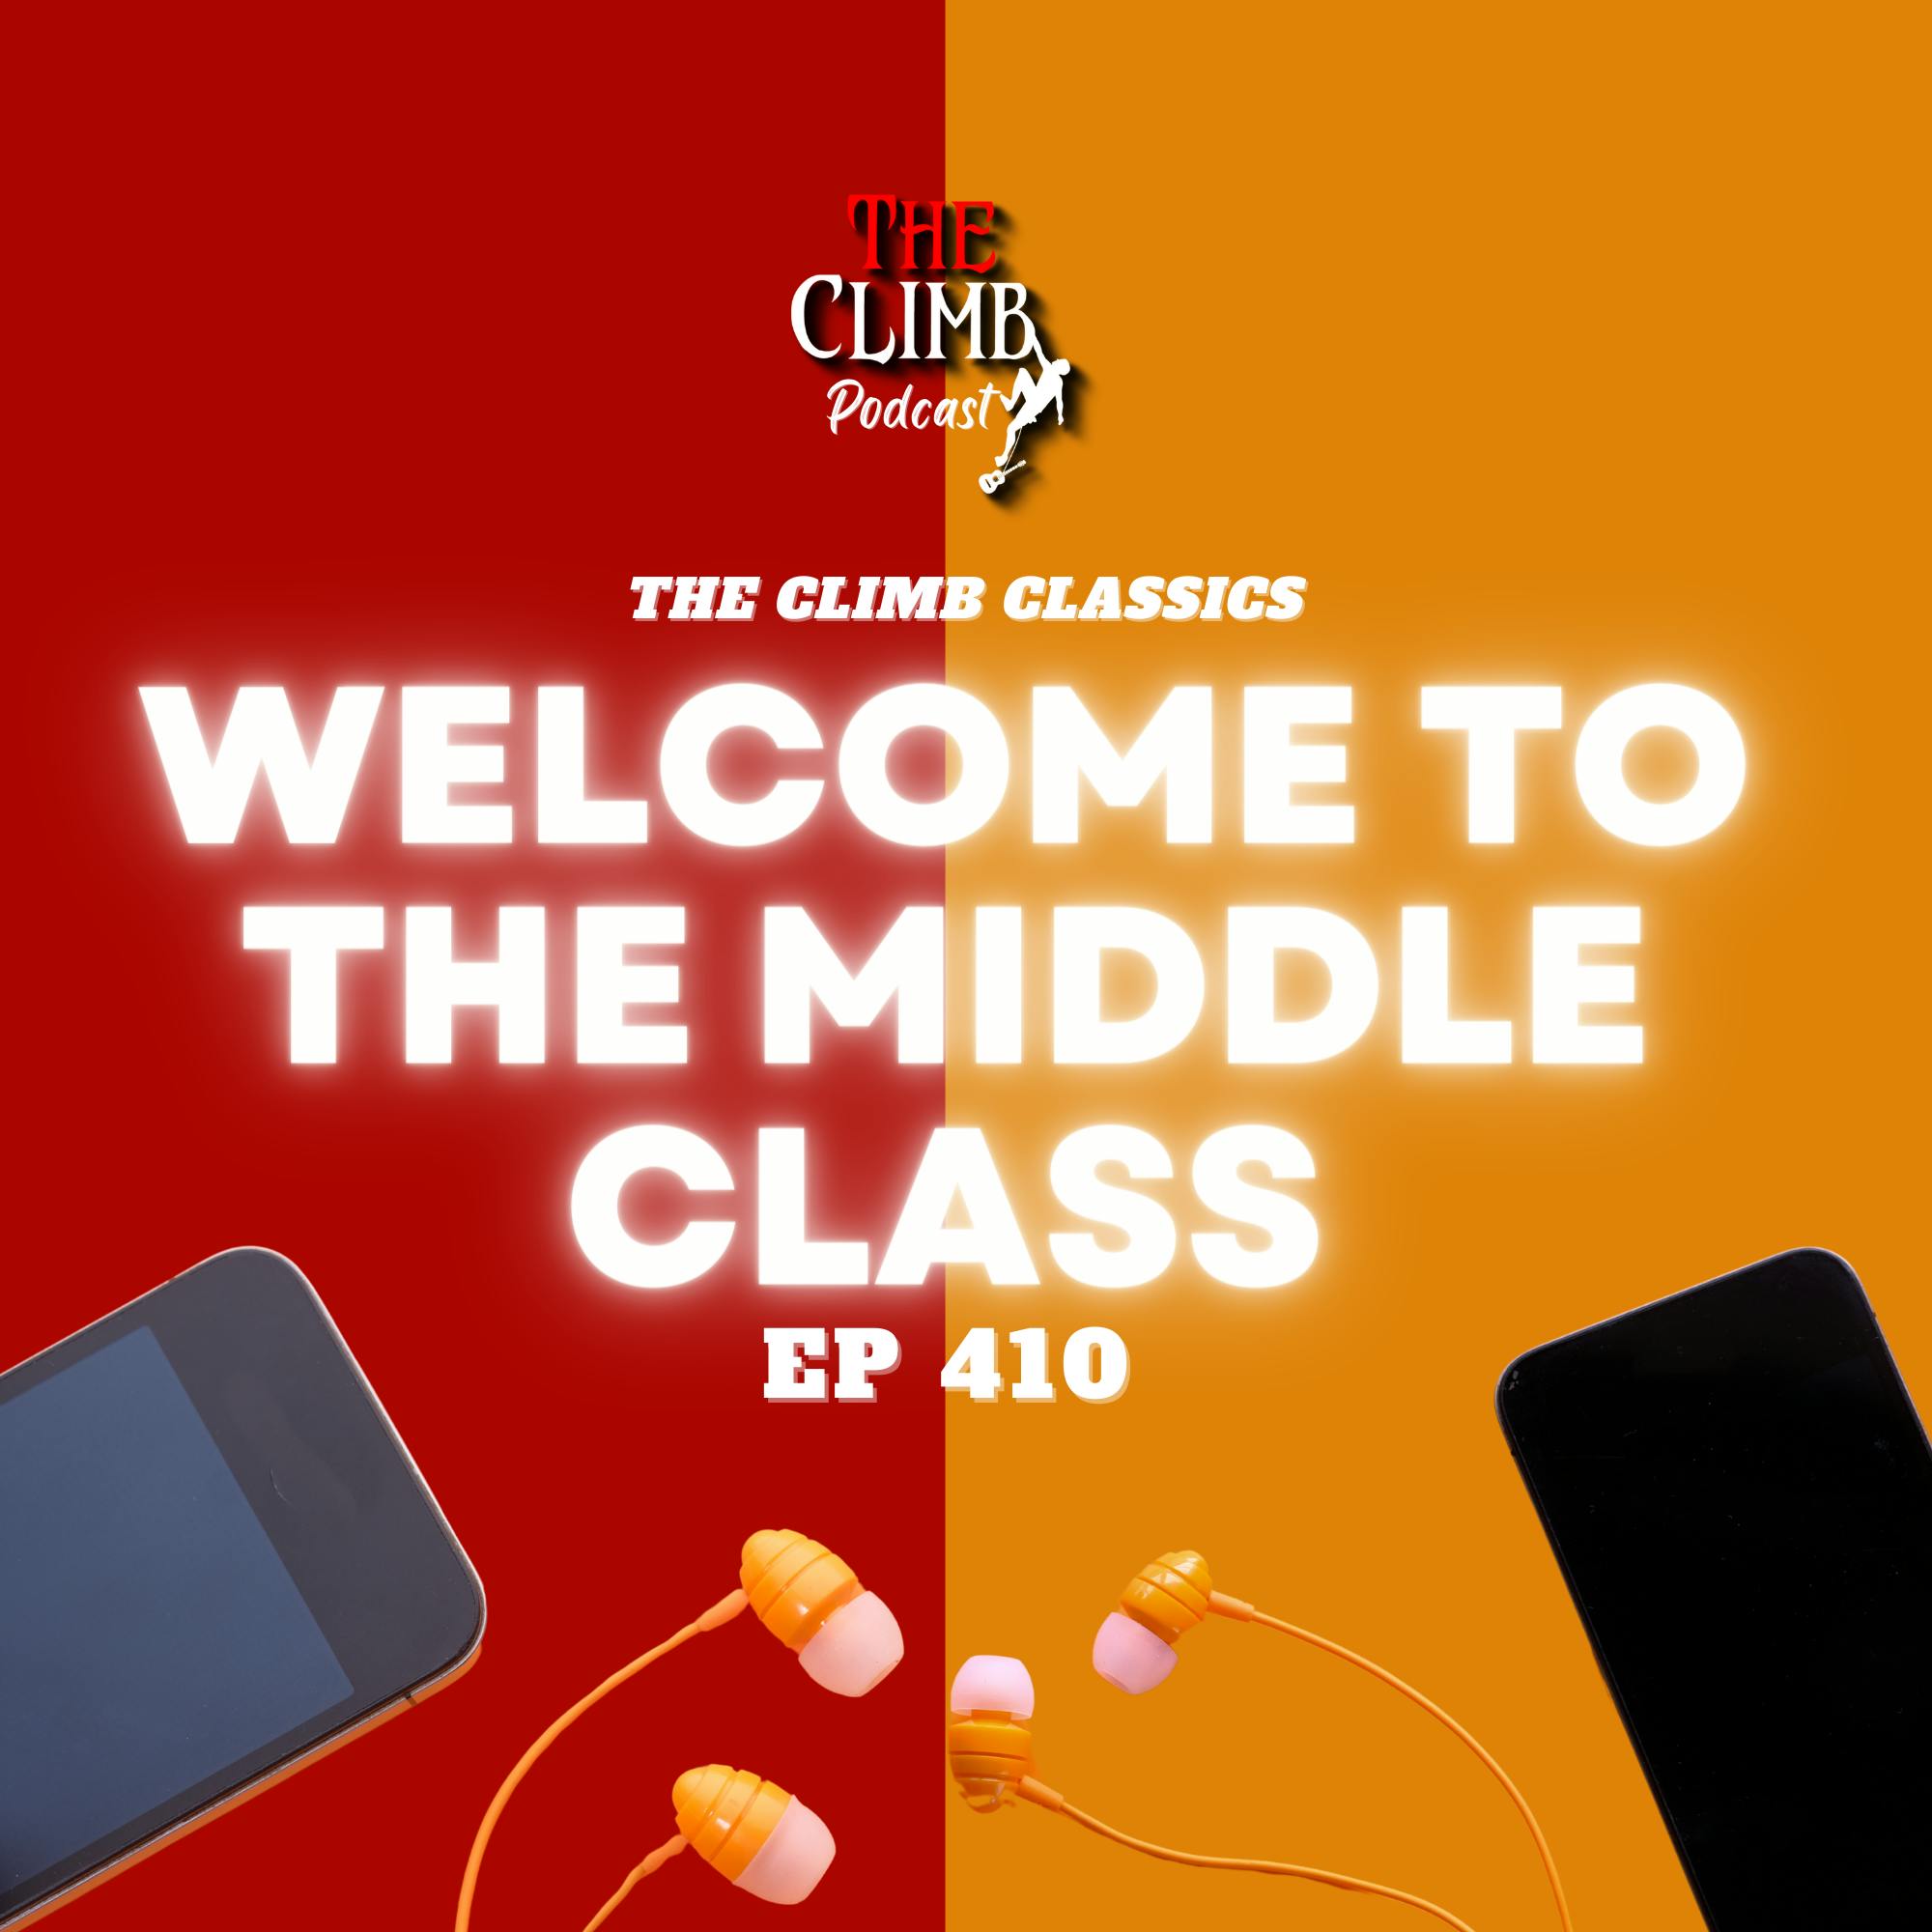 Ep 410: CLIMB CLASSIC - Welcome To The Middle Class!